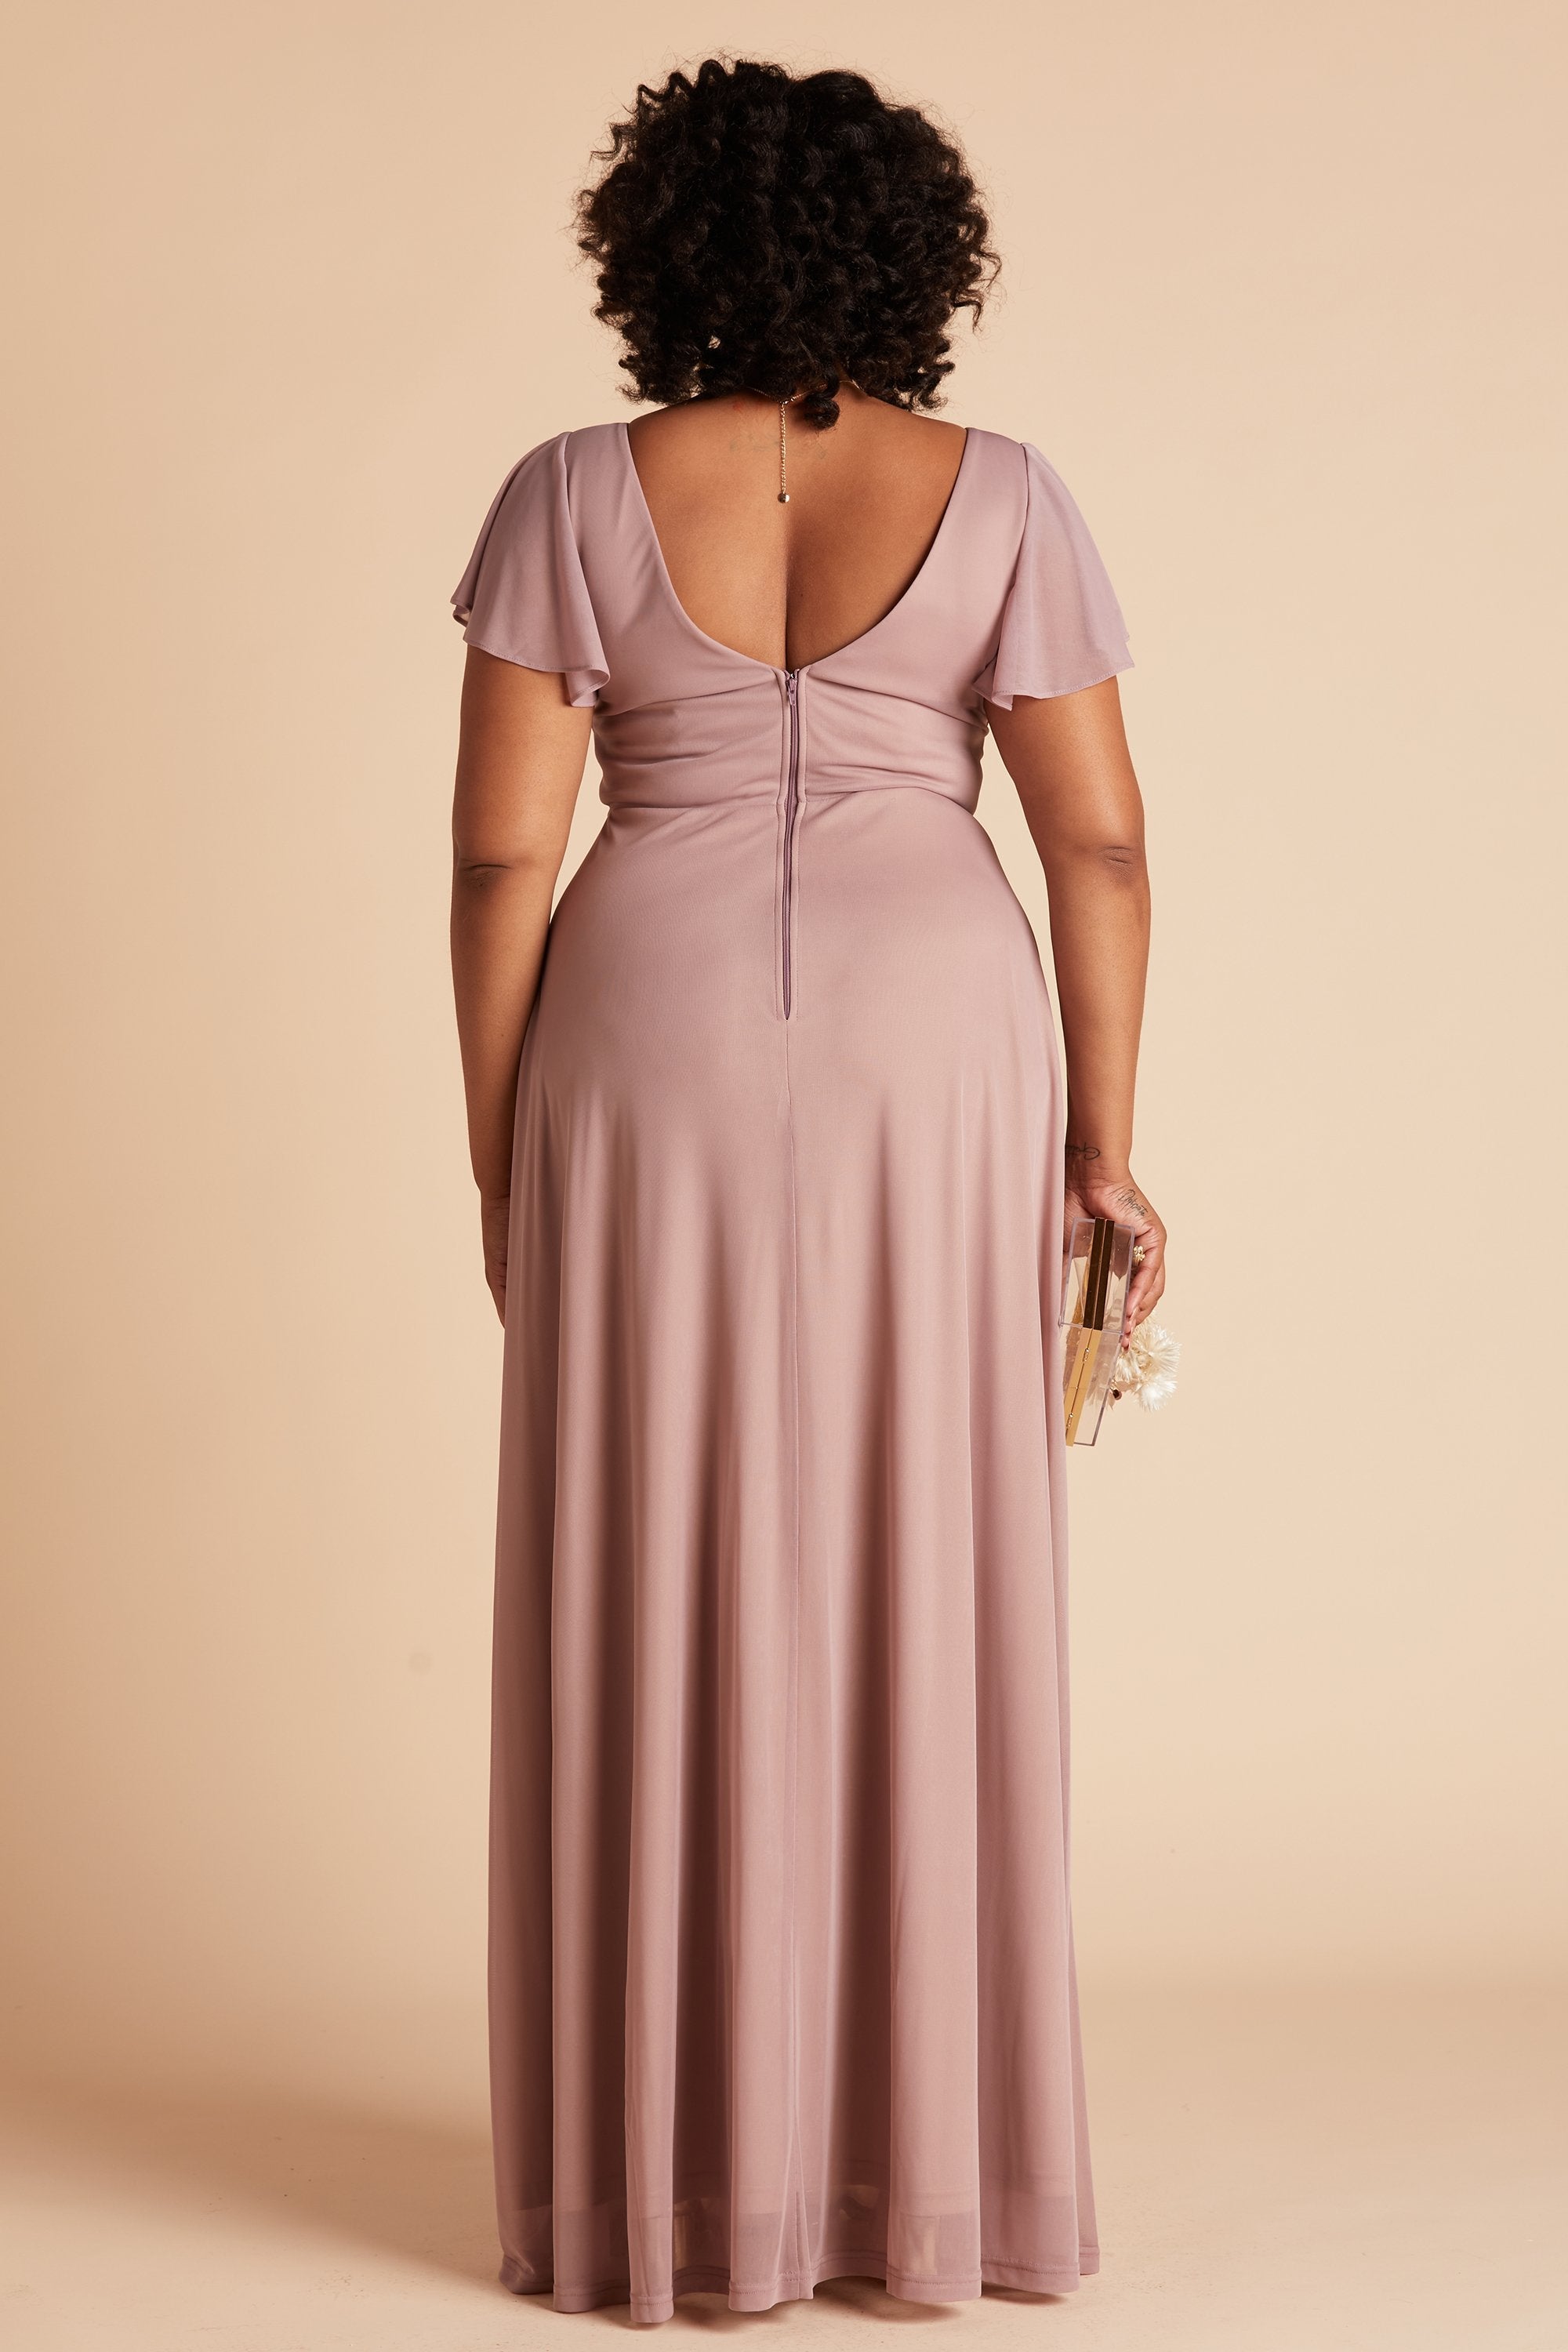 Hannah plus size bridesmaids dress in mauve mesh by Birdy Grey, back view